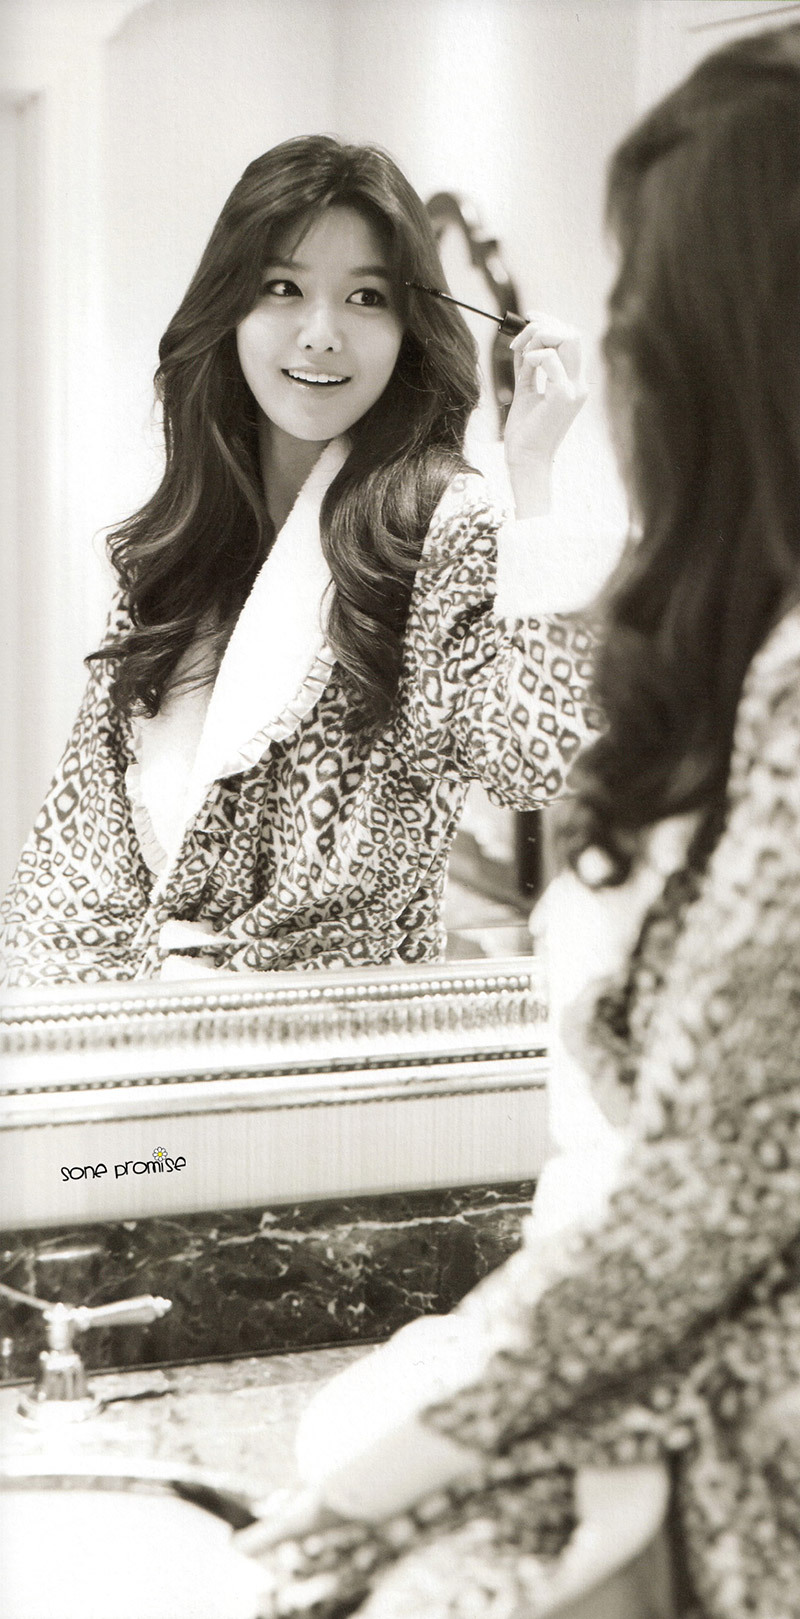 [SOOISM][VER 3] ☆ (¯`° CHOI SOOYOUNG °´¯) ☆ ► SOOYOUNGSTERS FAM ◄ ☆ ► WE <3 CHOI SHIKSHIN FOREVER ◄ ☆ - Page 22 Tumblr_nb8tzyyBpL1r2xhr2o1_1280